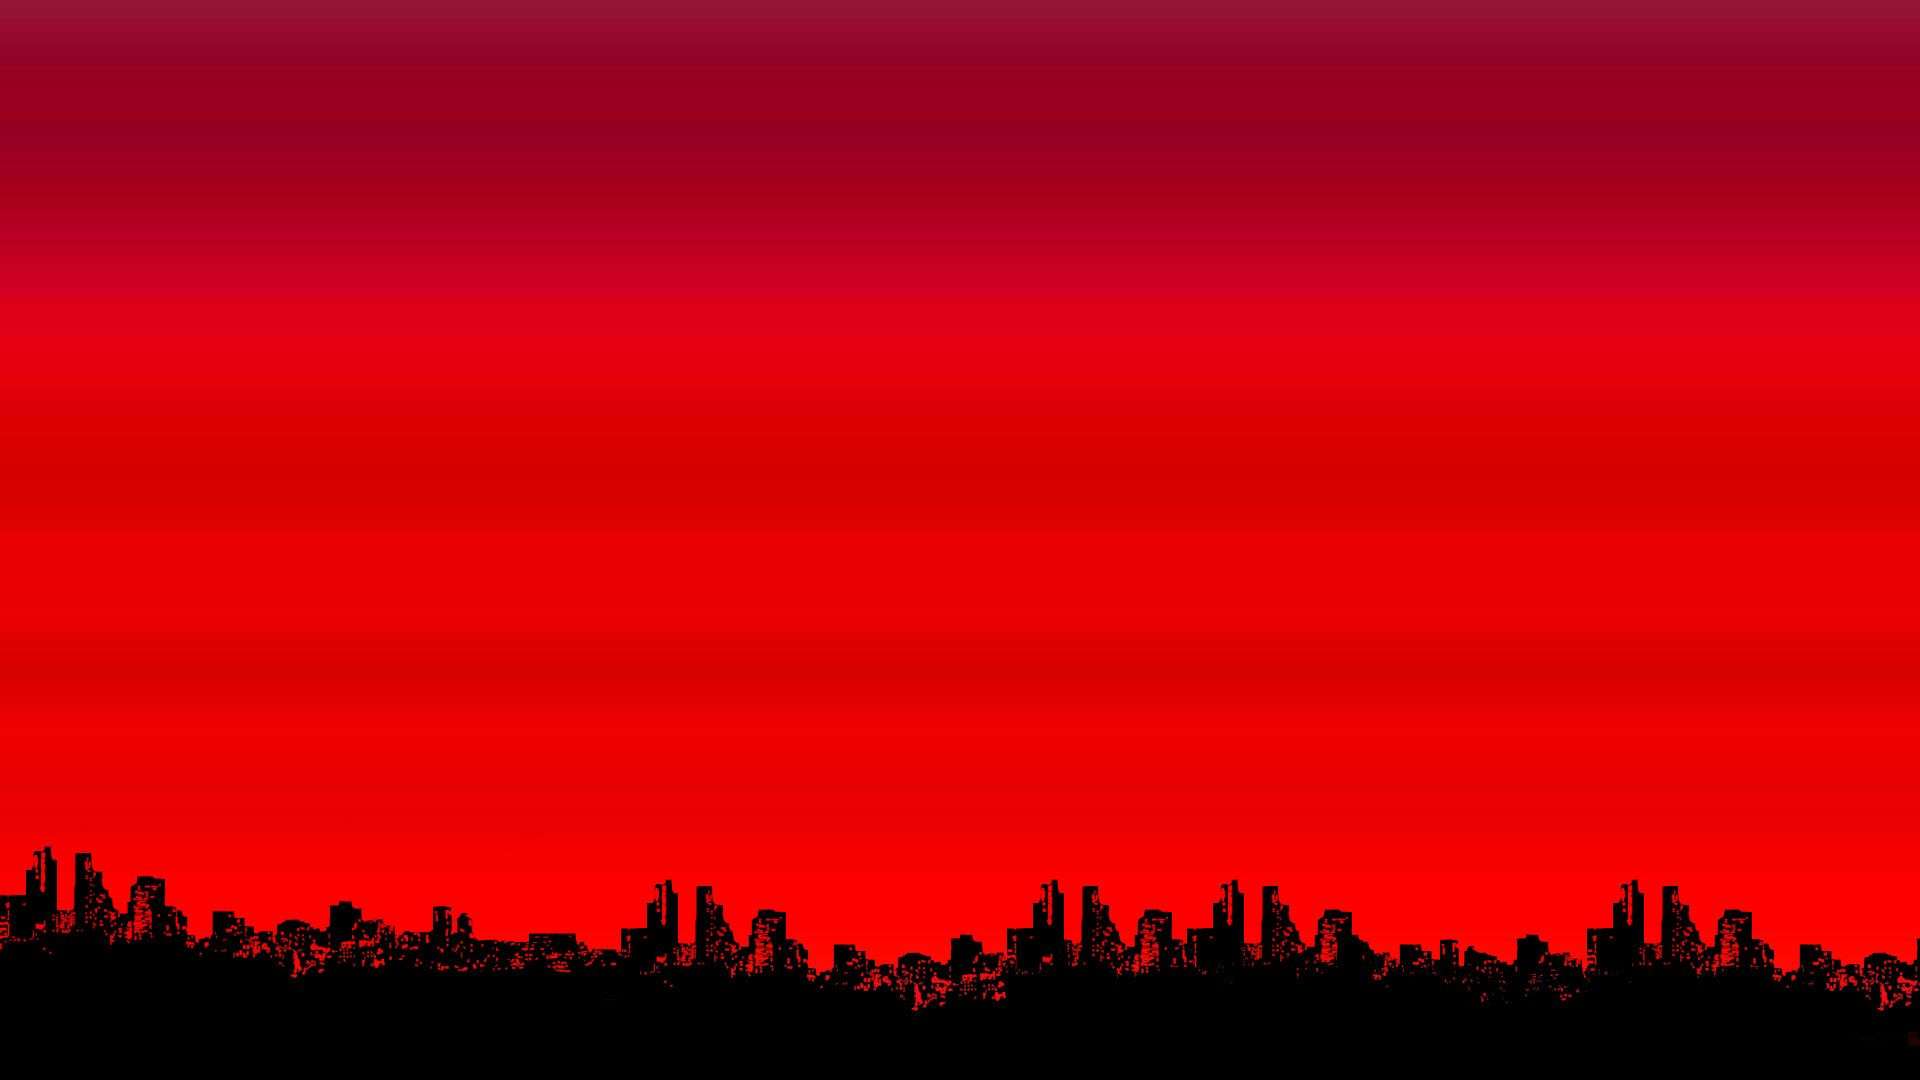 Aesthetic Red And Black Wallpaper 1920x1080